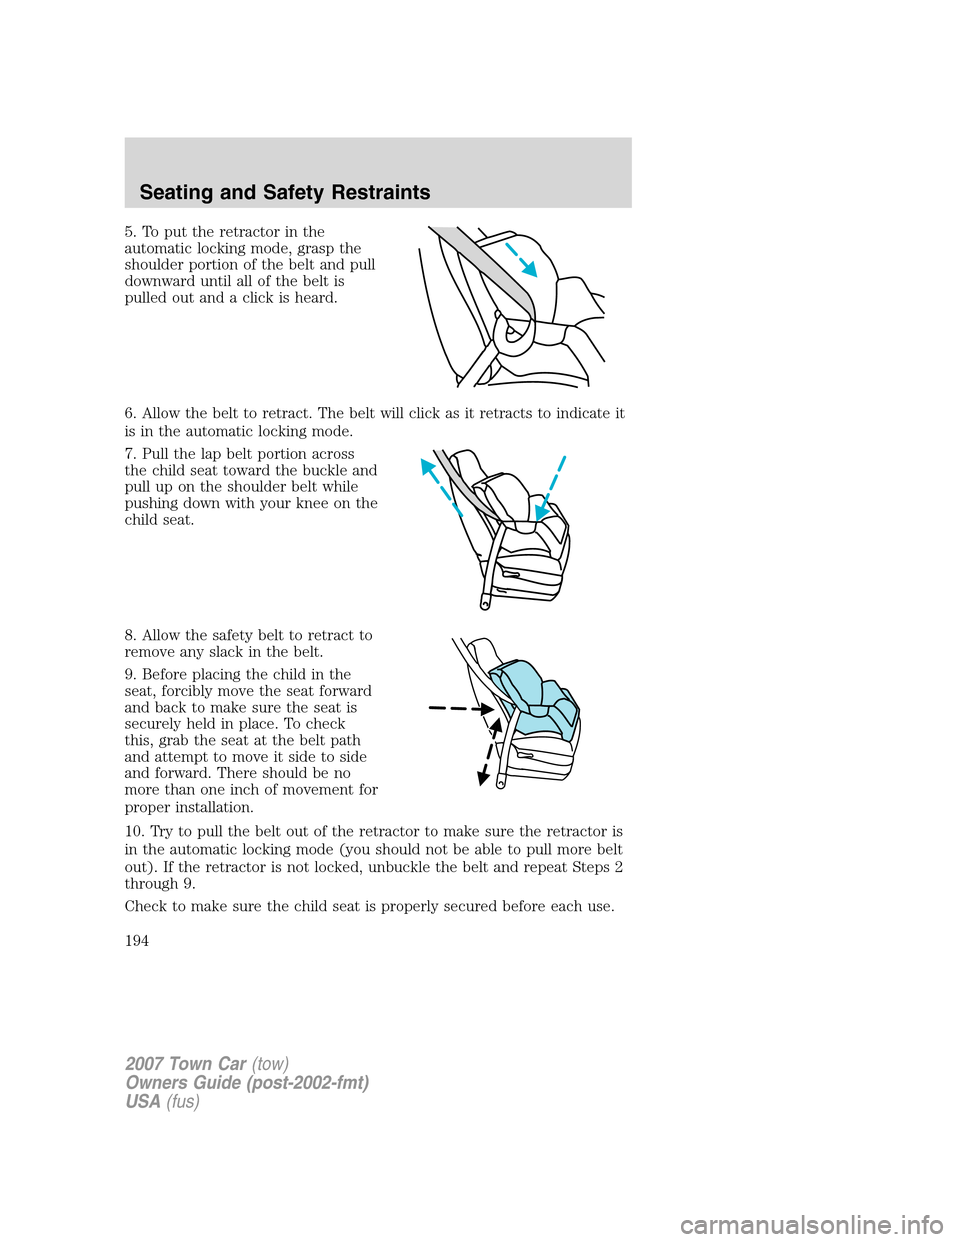 LINCOLN TOWN CAR 2007 Owners Guide 5. To put the retractor in the
automatic locking mode, grasp the
shoulder portion of the belt and pull
downward until all of the belt is
pulled out and a click is heard.
6. Allow the belt to retract. 